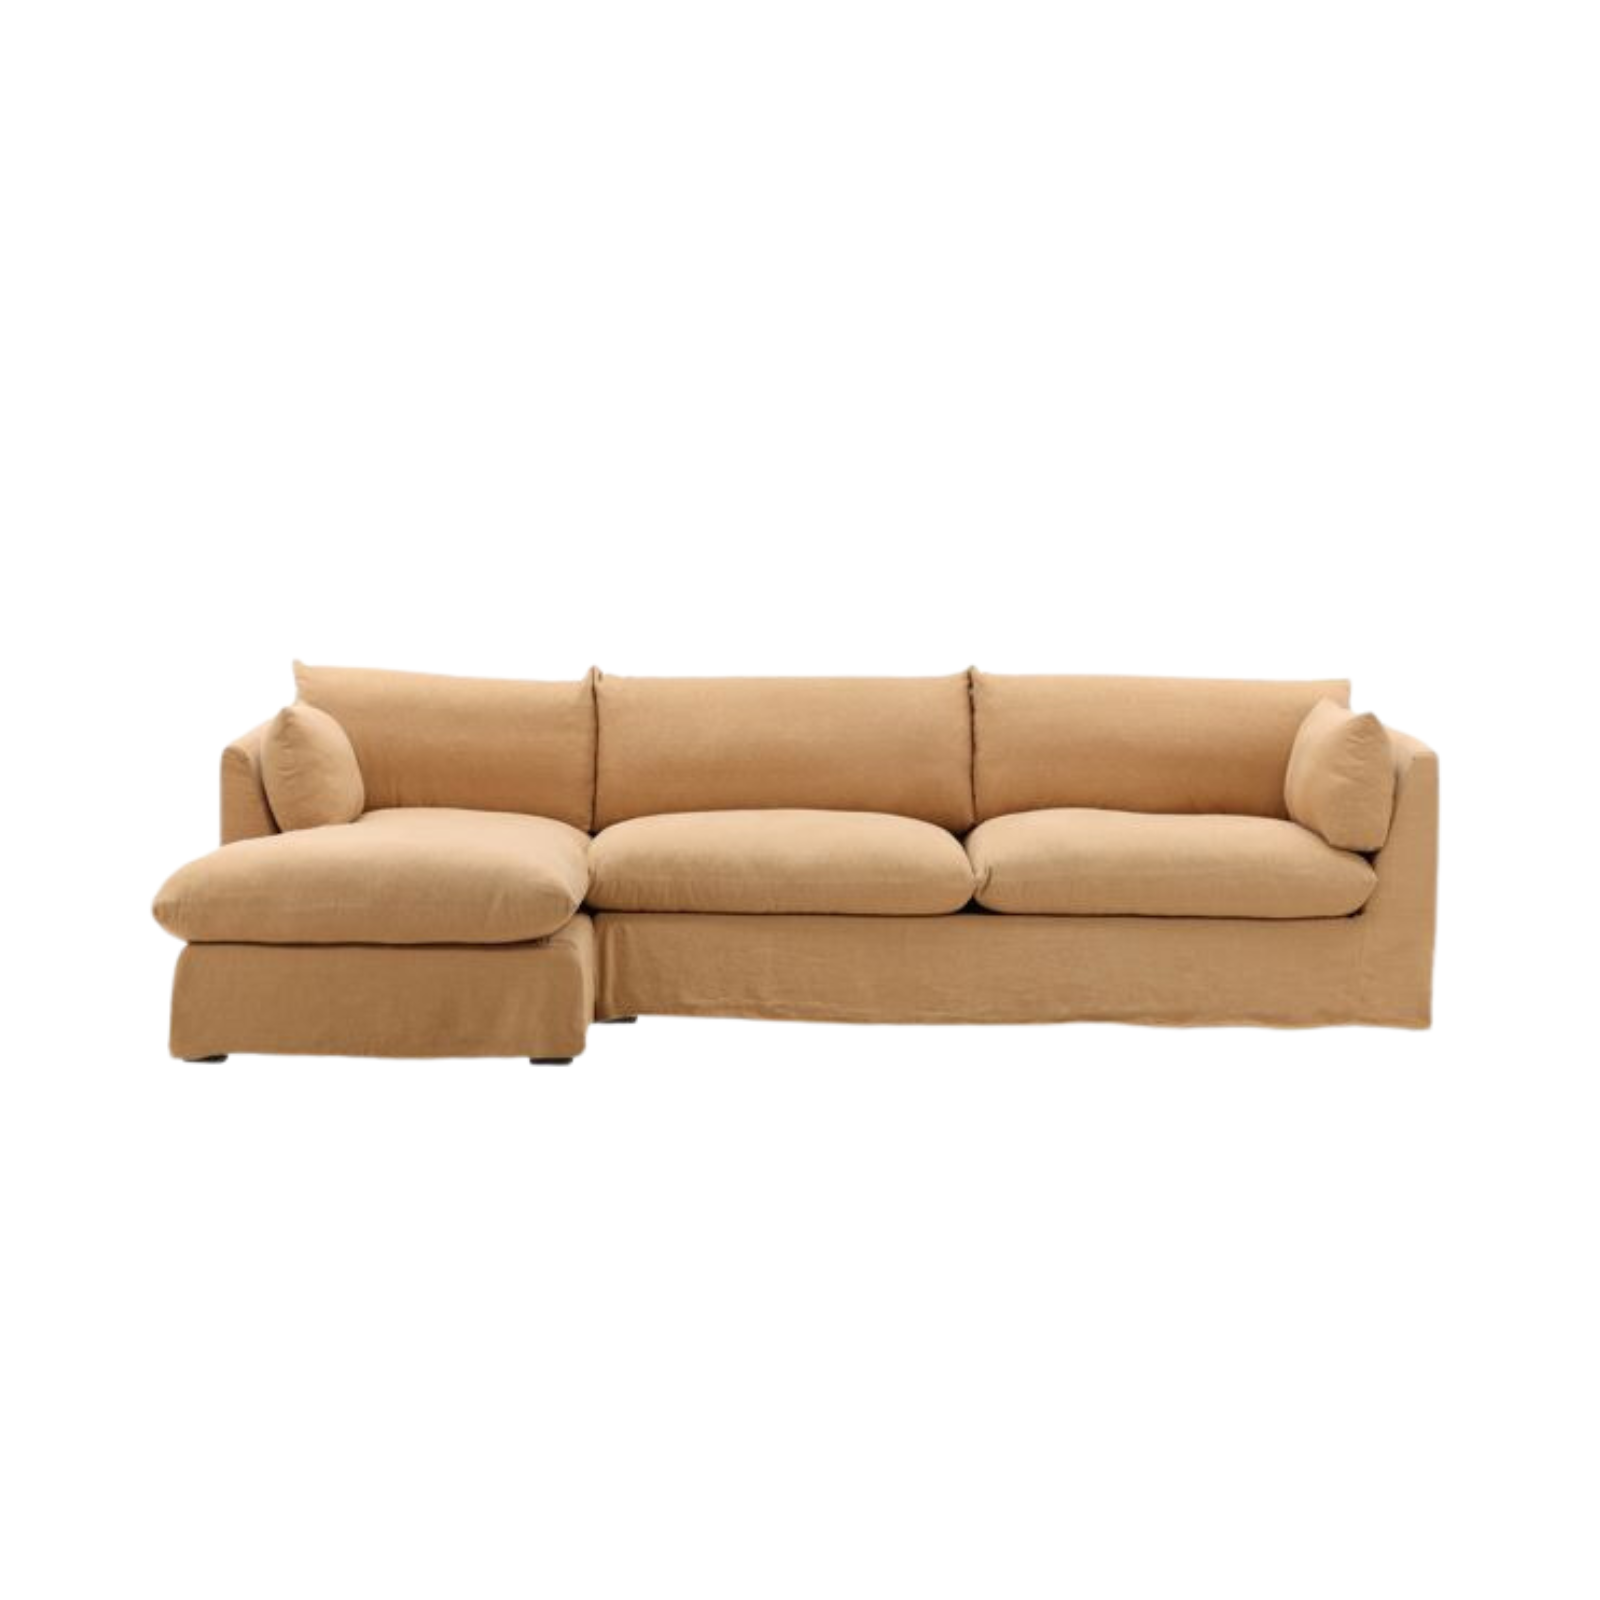 Odessa 2 Piece Chaise Sectional